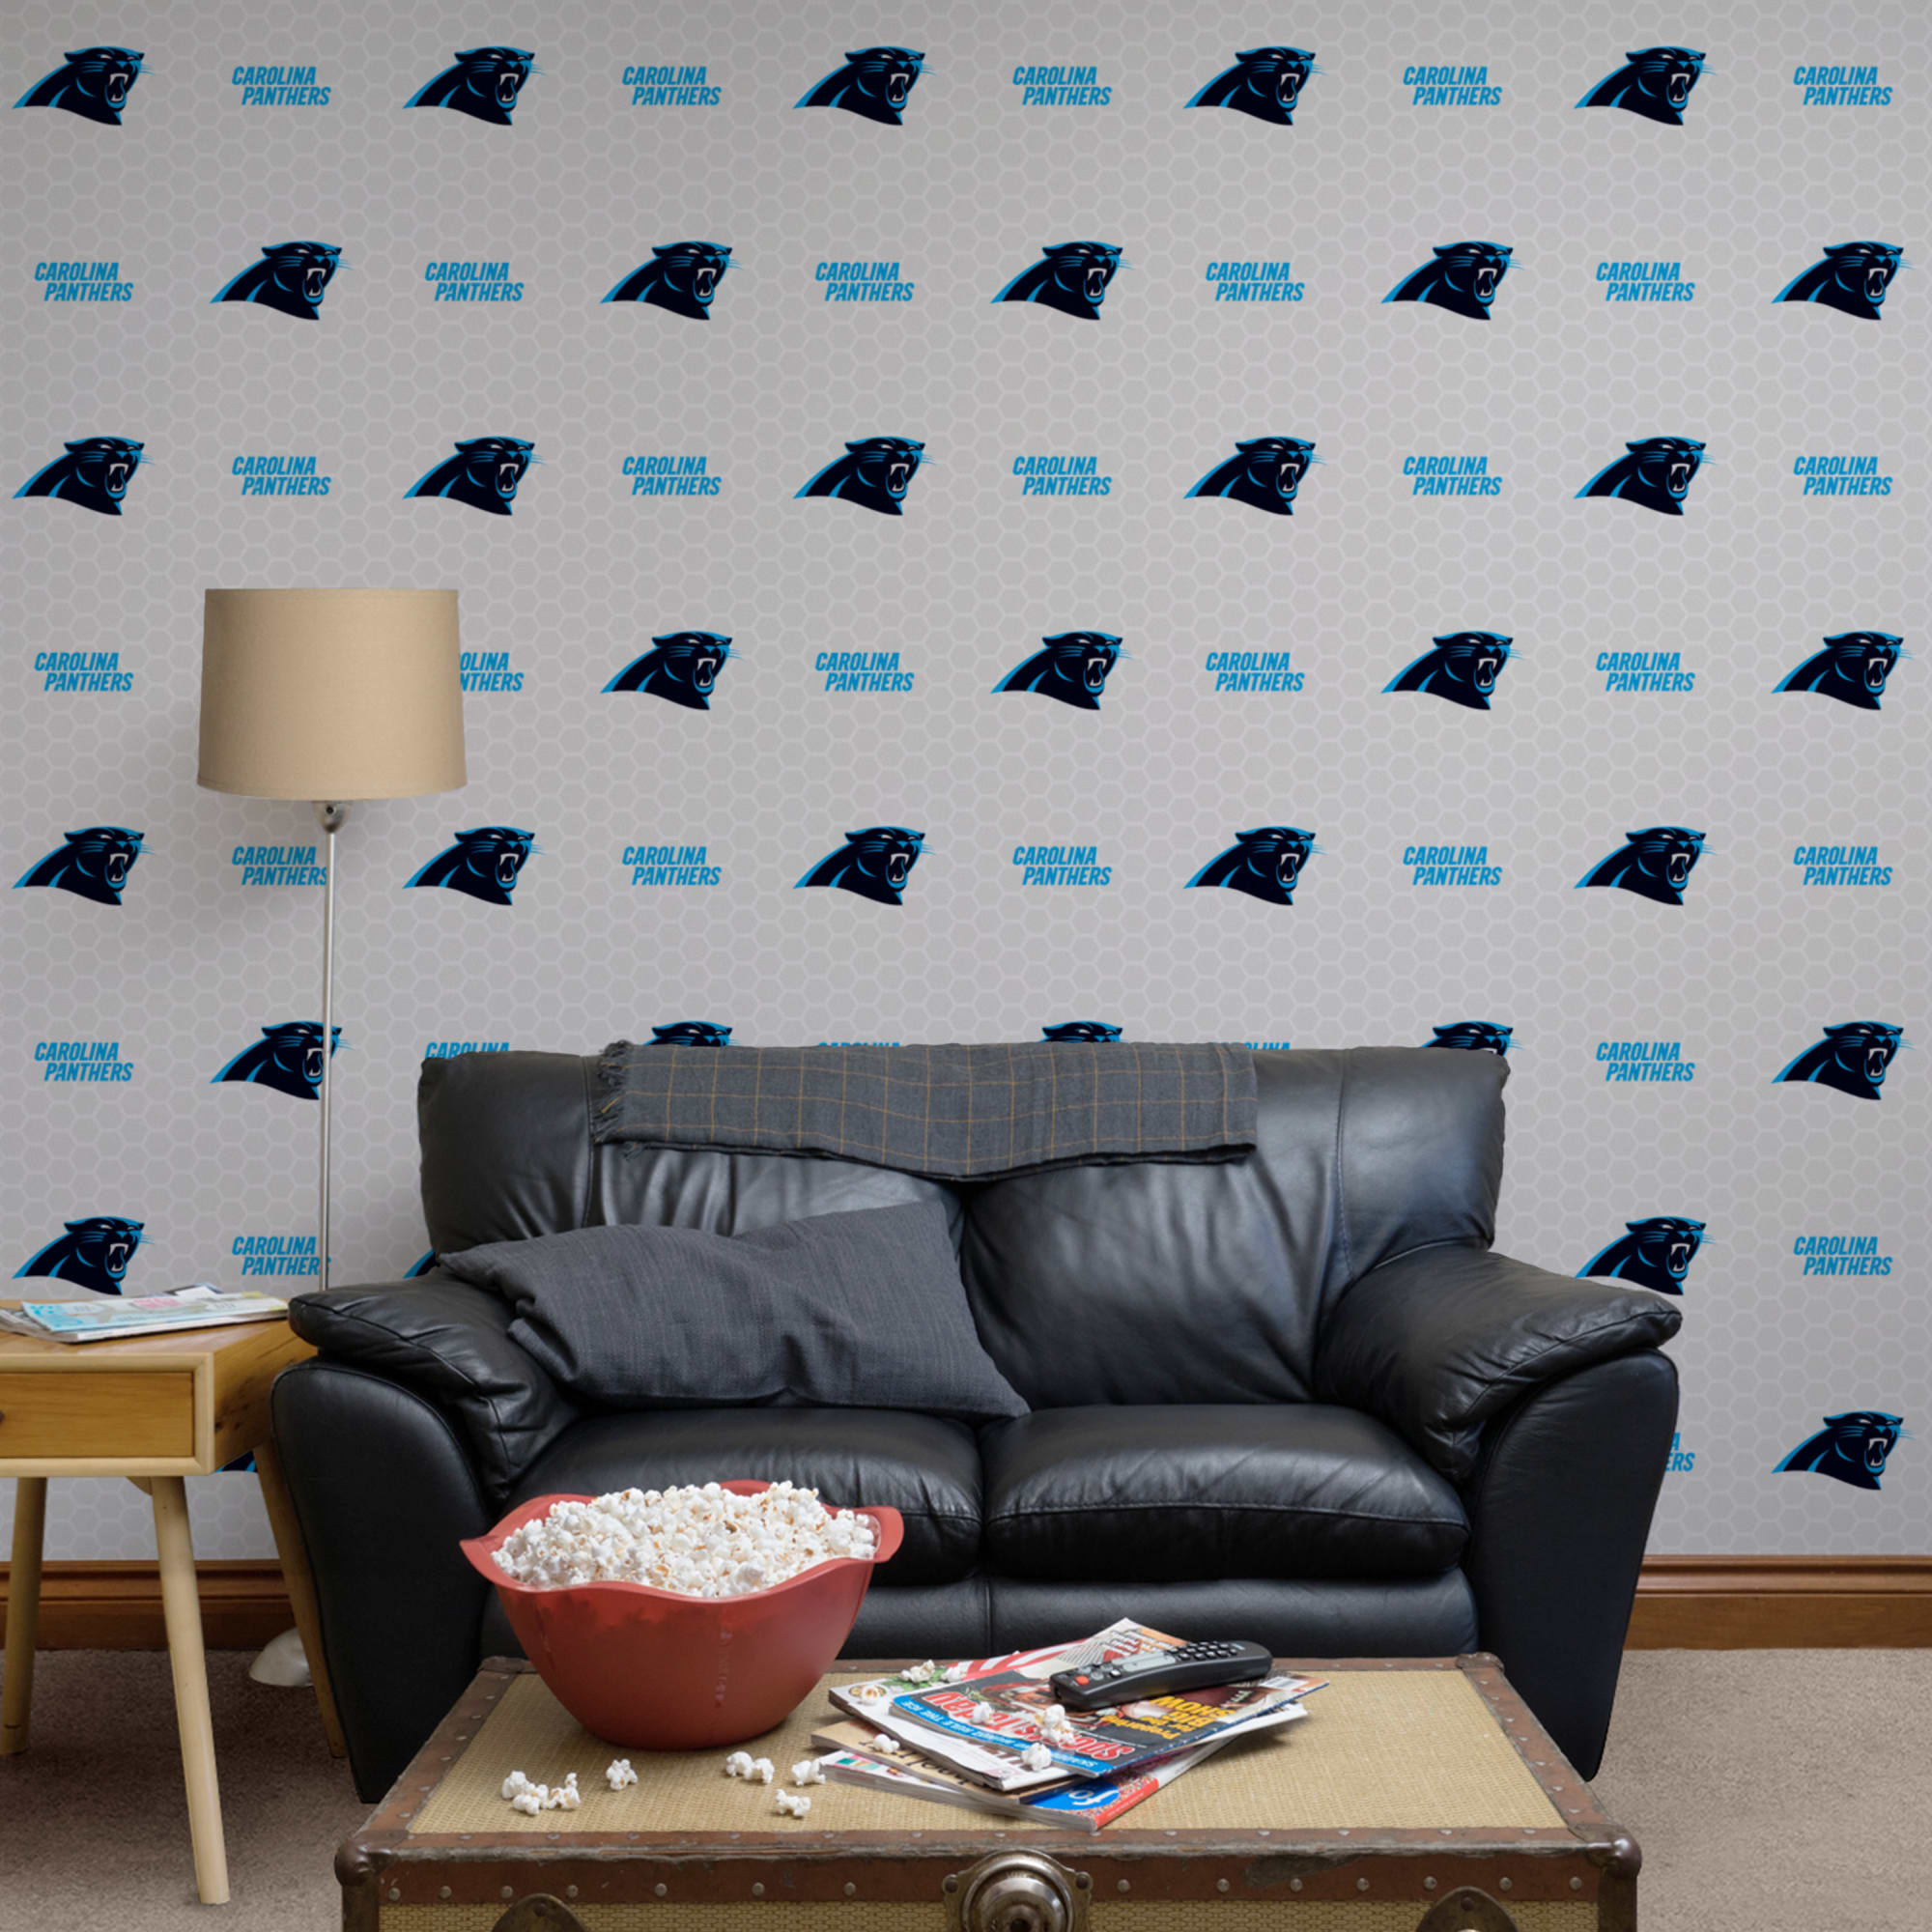 Carolina Panthers: Logo Pattern - Officially Licensed NFL Removable Wallpaper 12" x 12" Sample by Fathead | 100% Vinyl